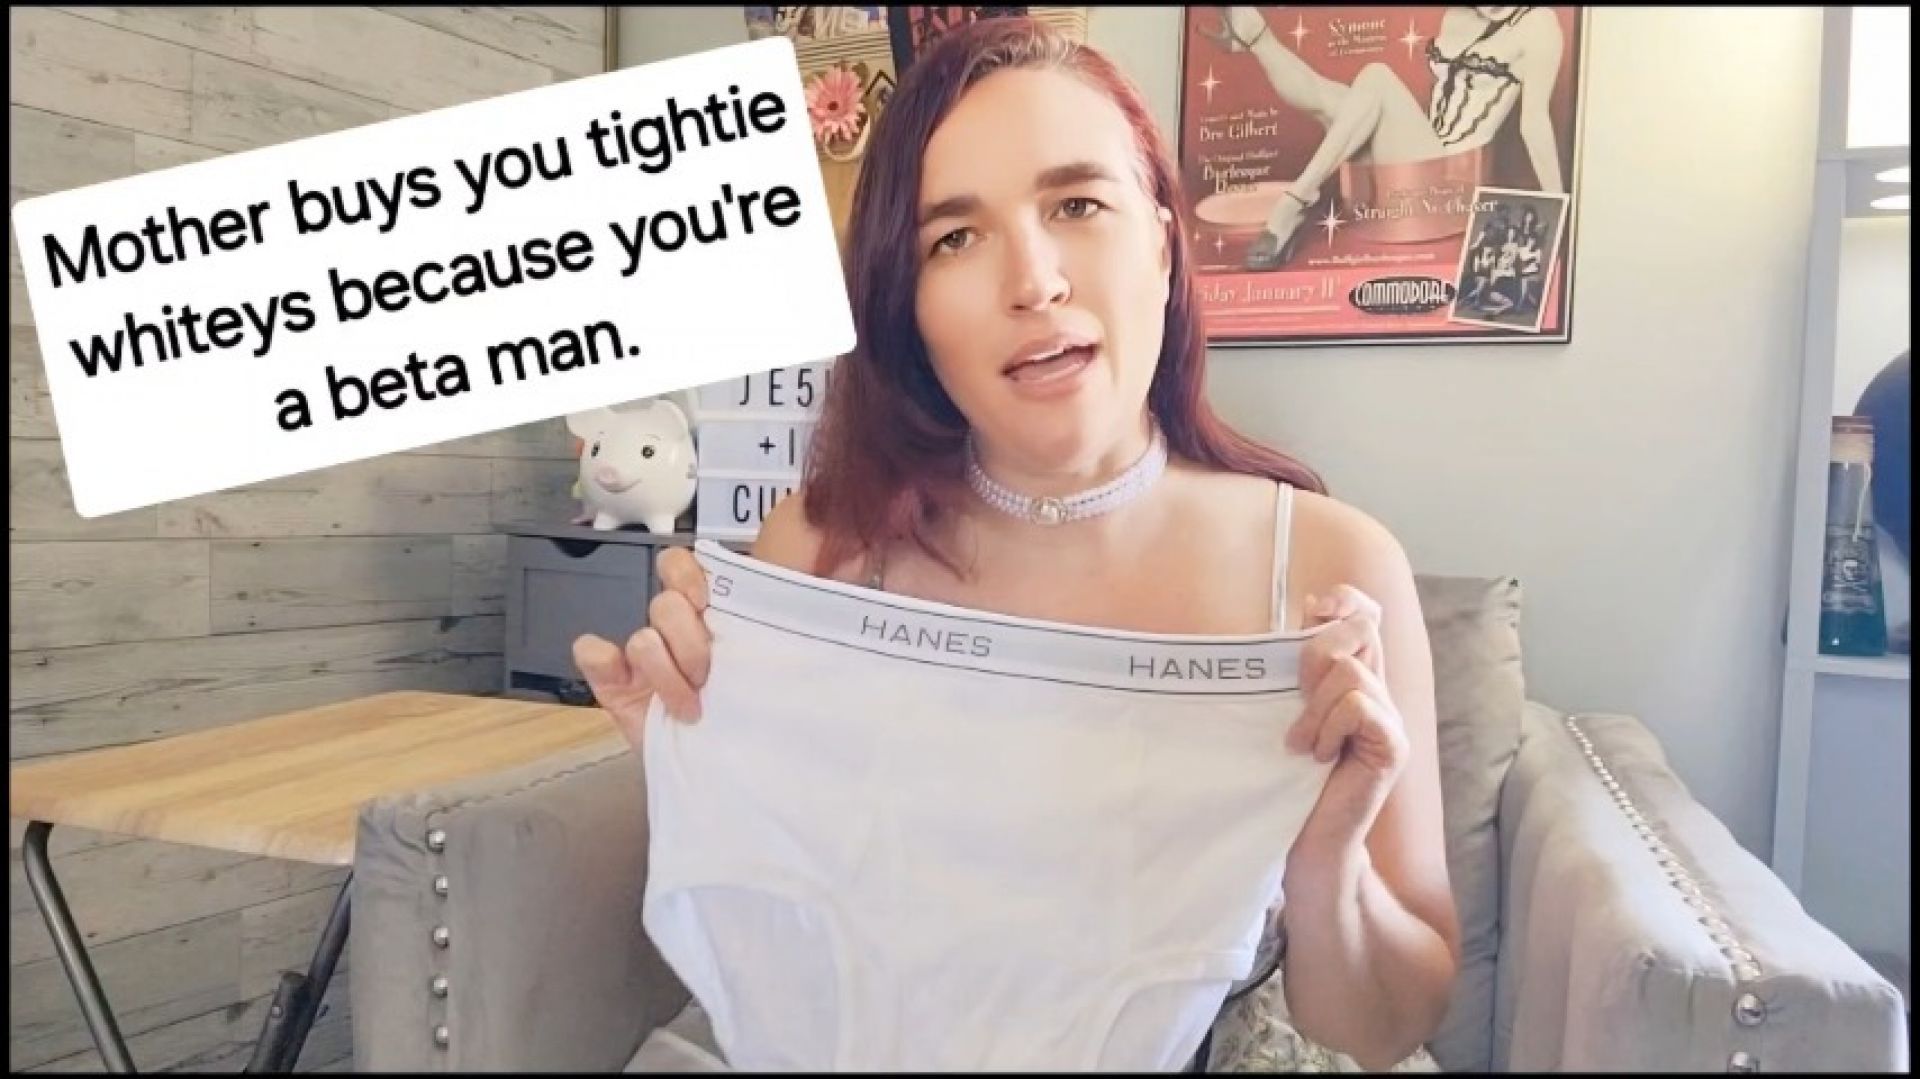 Mother buys you tighty whities because you're a beta man